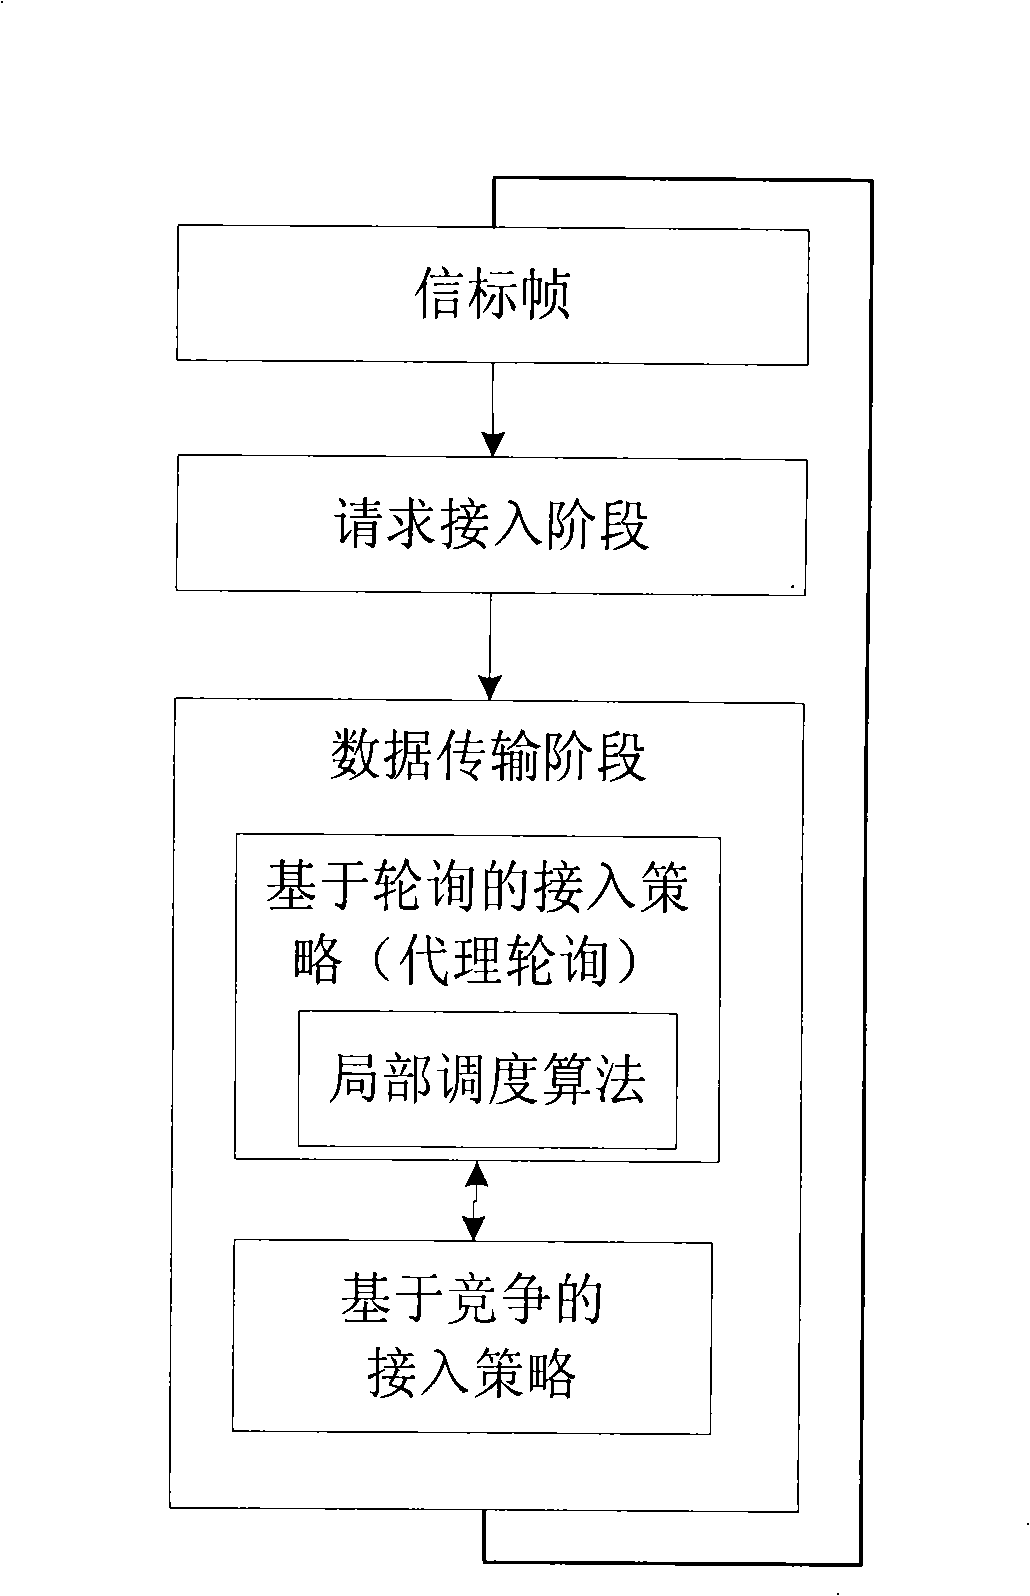 Distributed media access control protocol for increasing capacity of wireless local area network